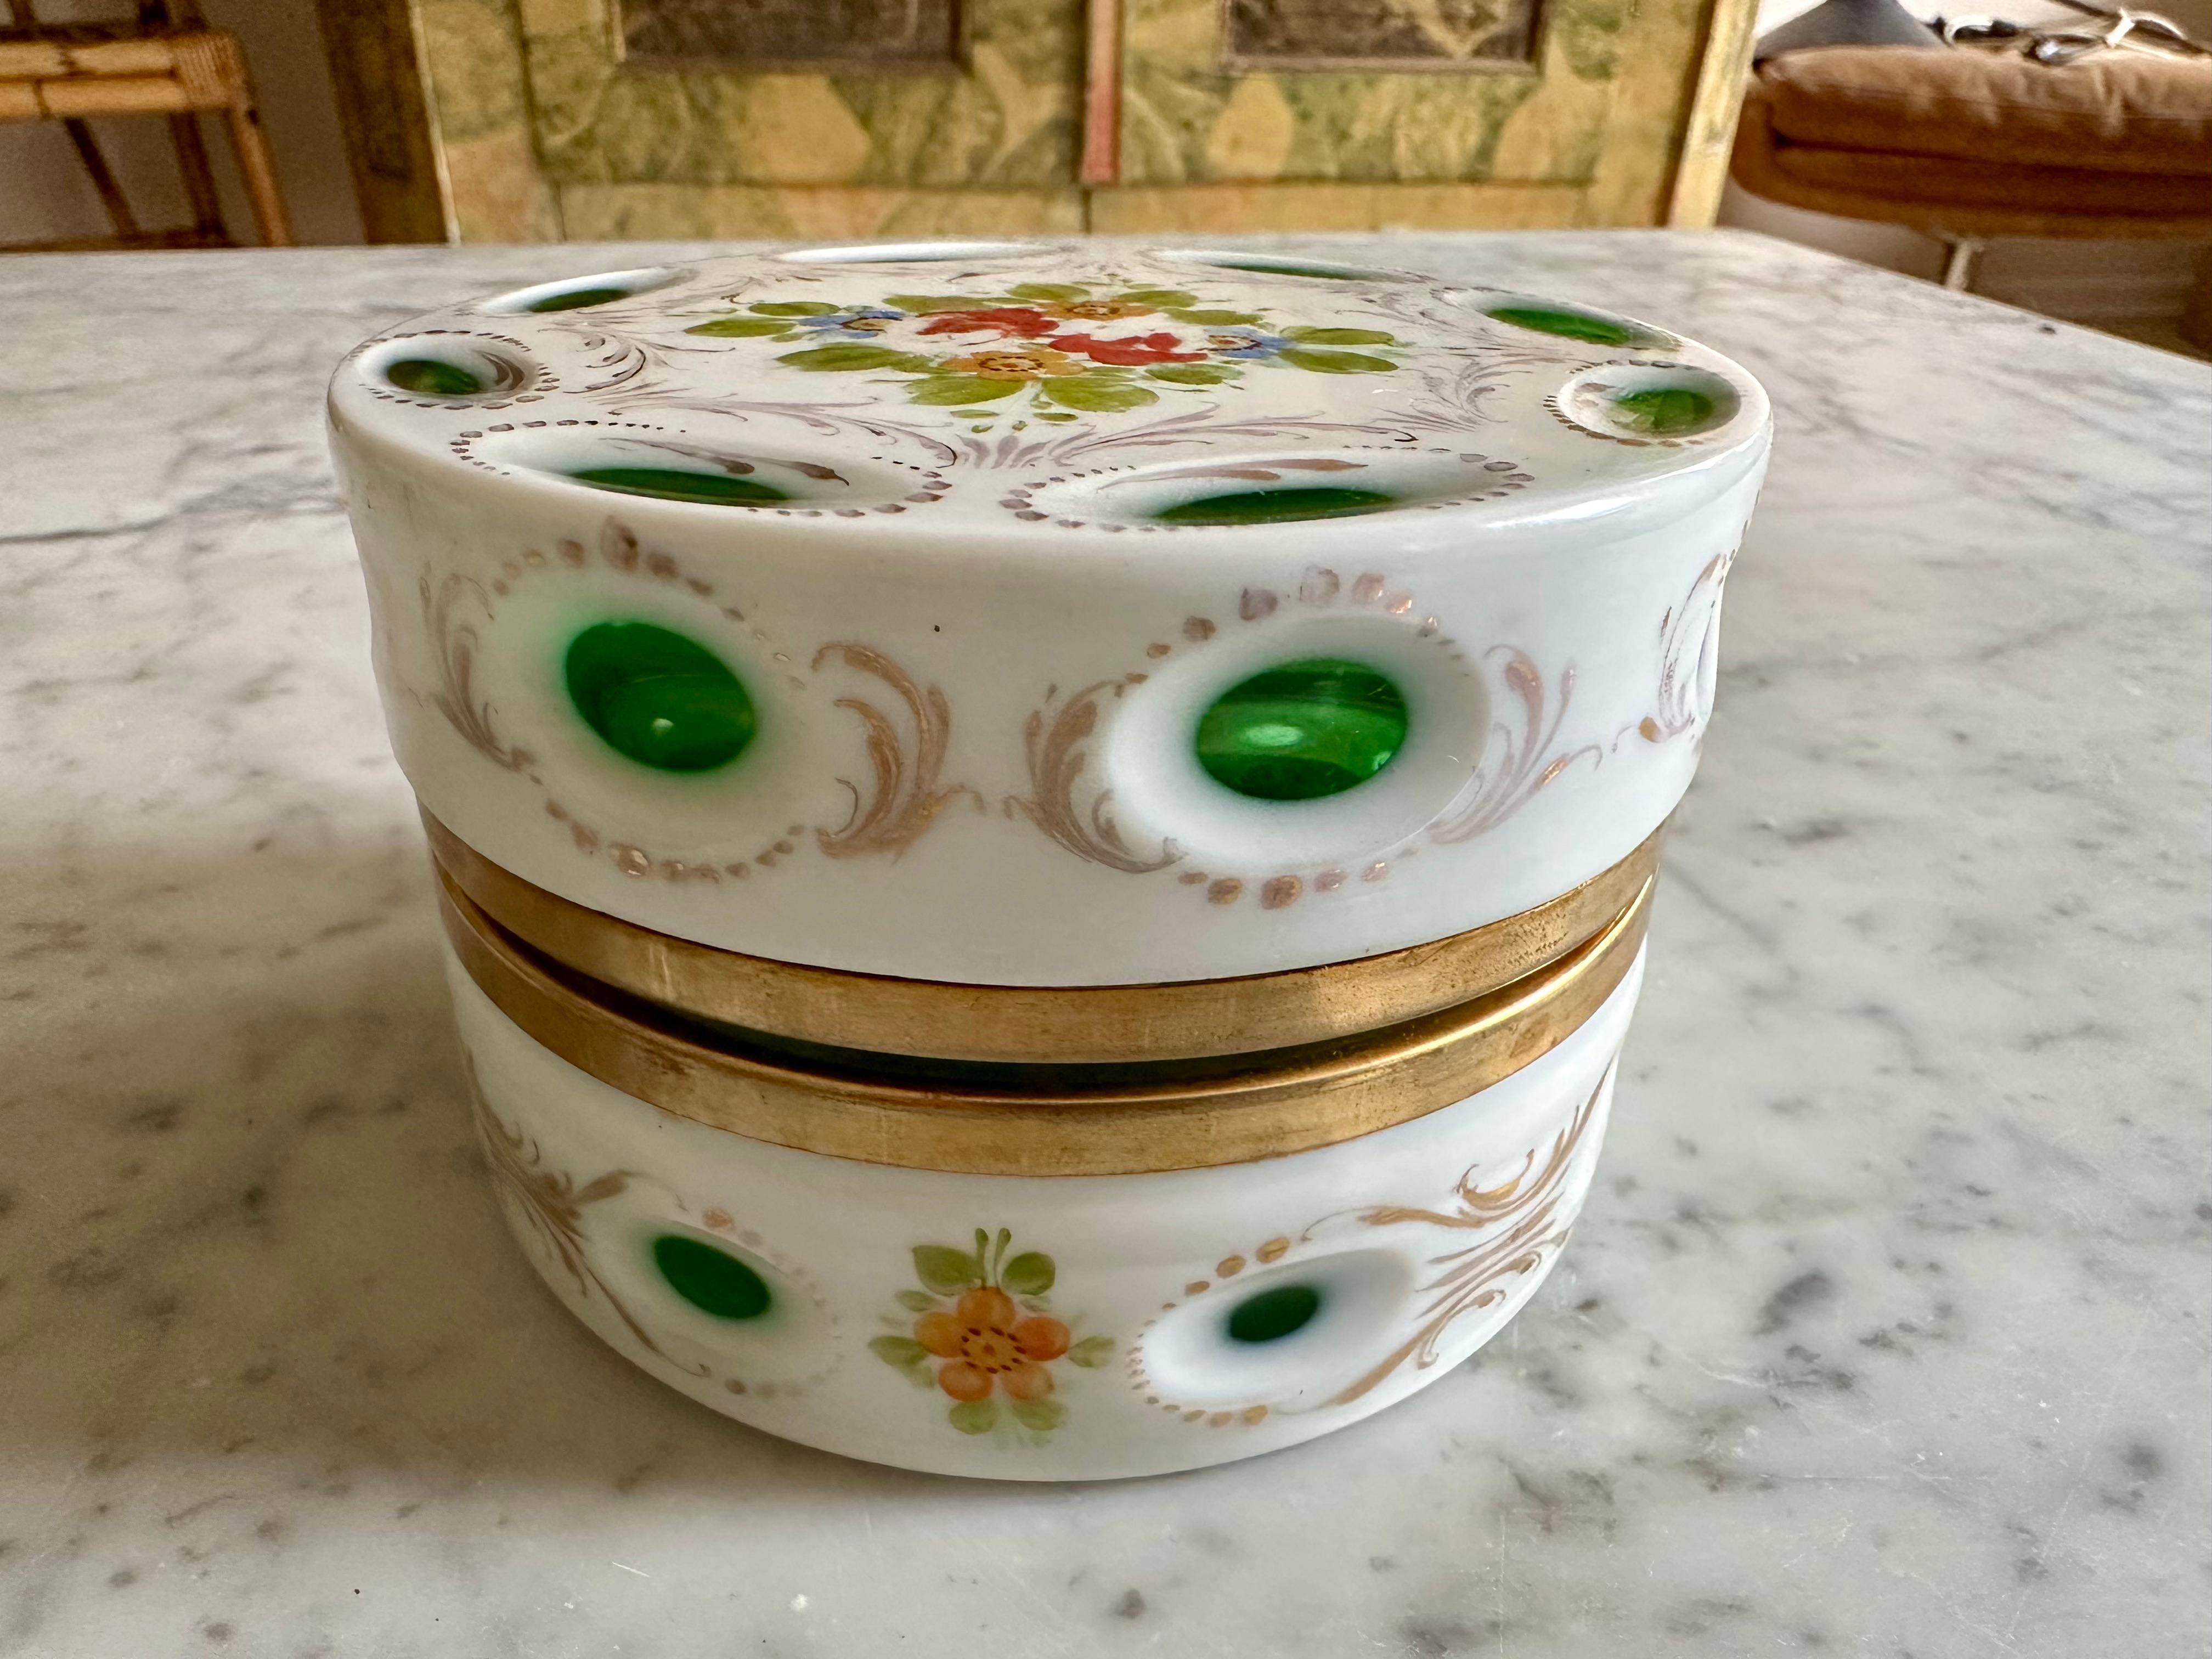 1890s Opaline Glass Lidded Box with Floral Ornament, white an green For Sale 10